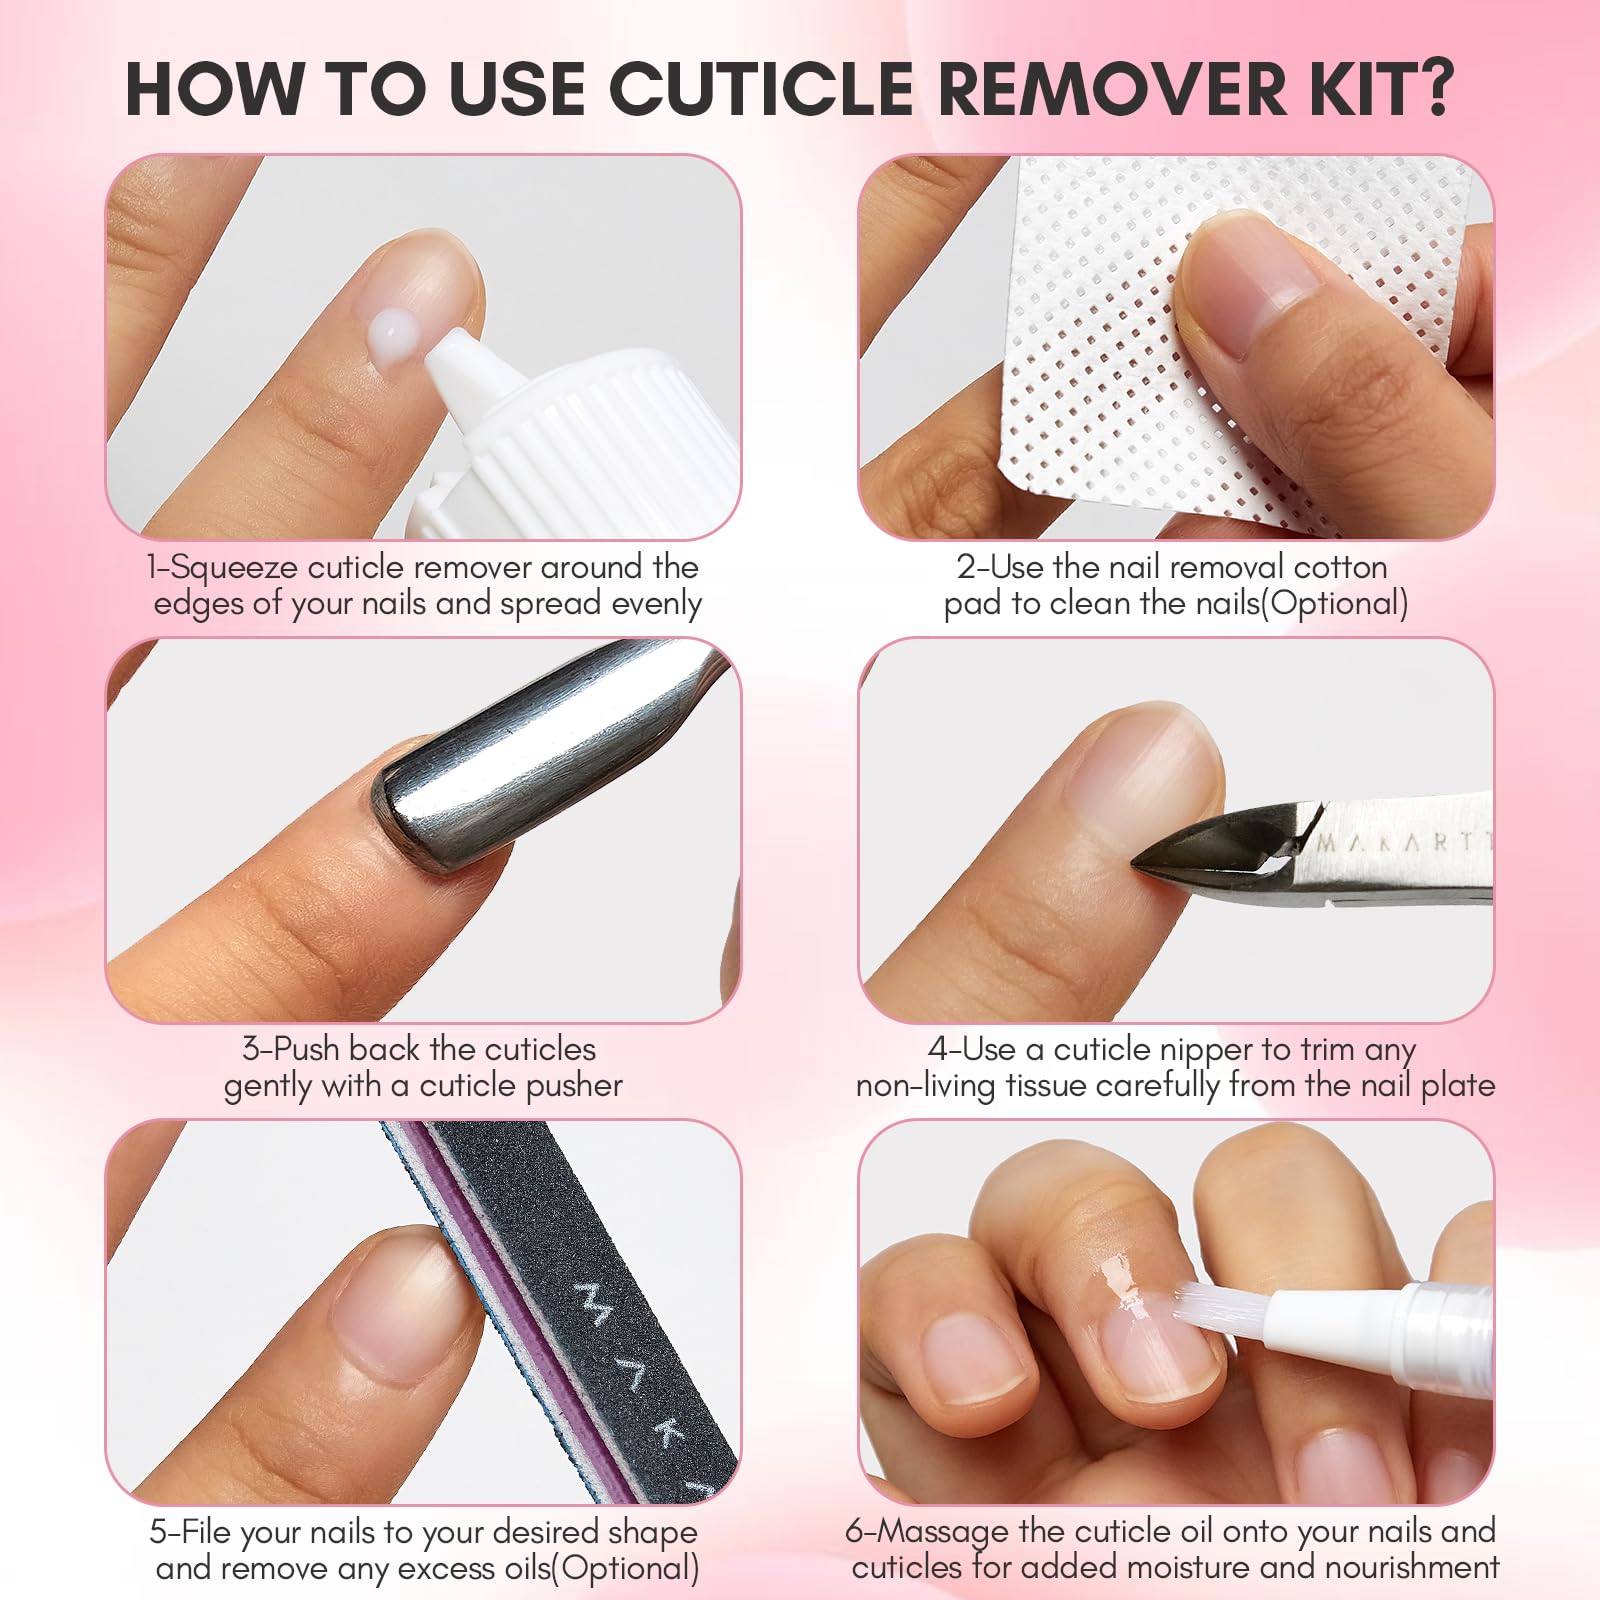 Cuticle Remover Kit, Nail Care Tool Kit for Cuticle Softener & Moisturize